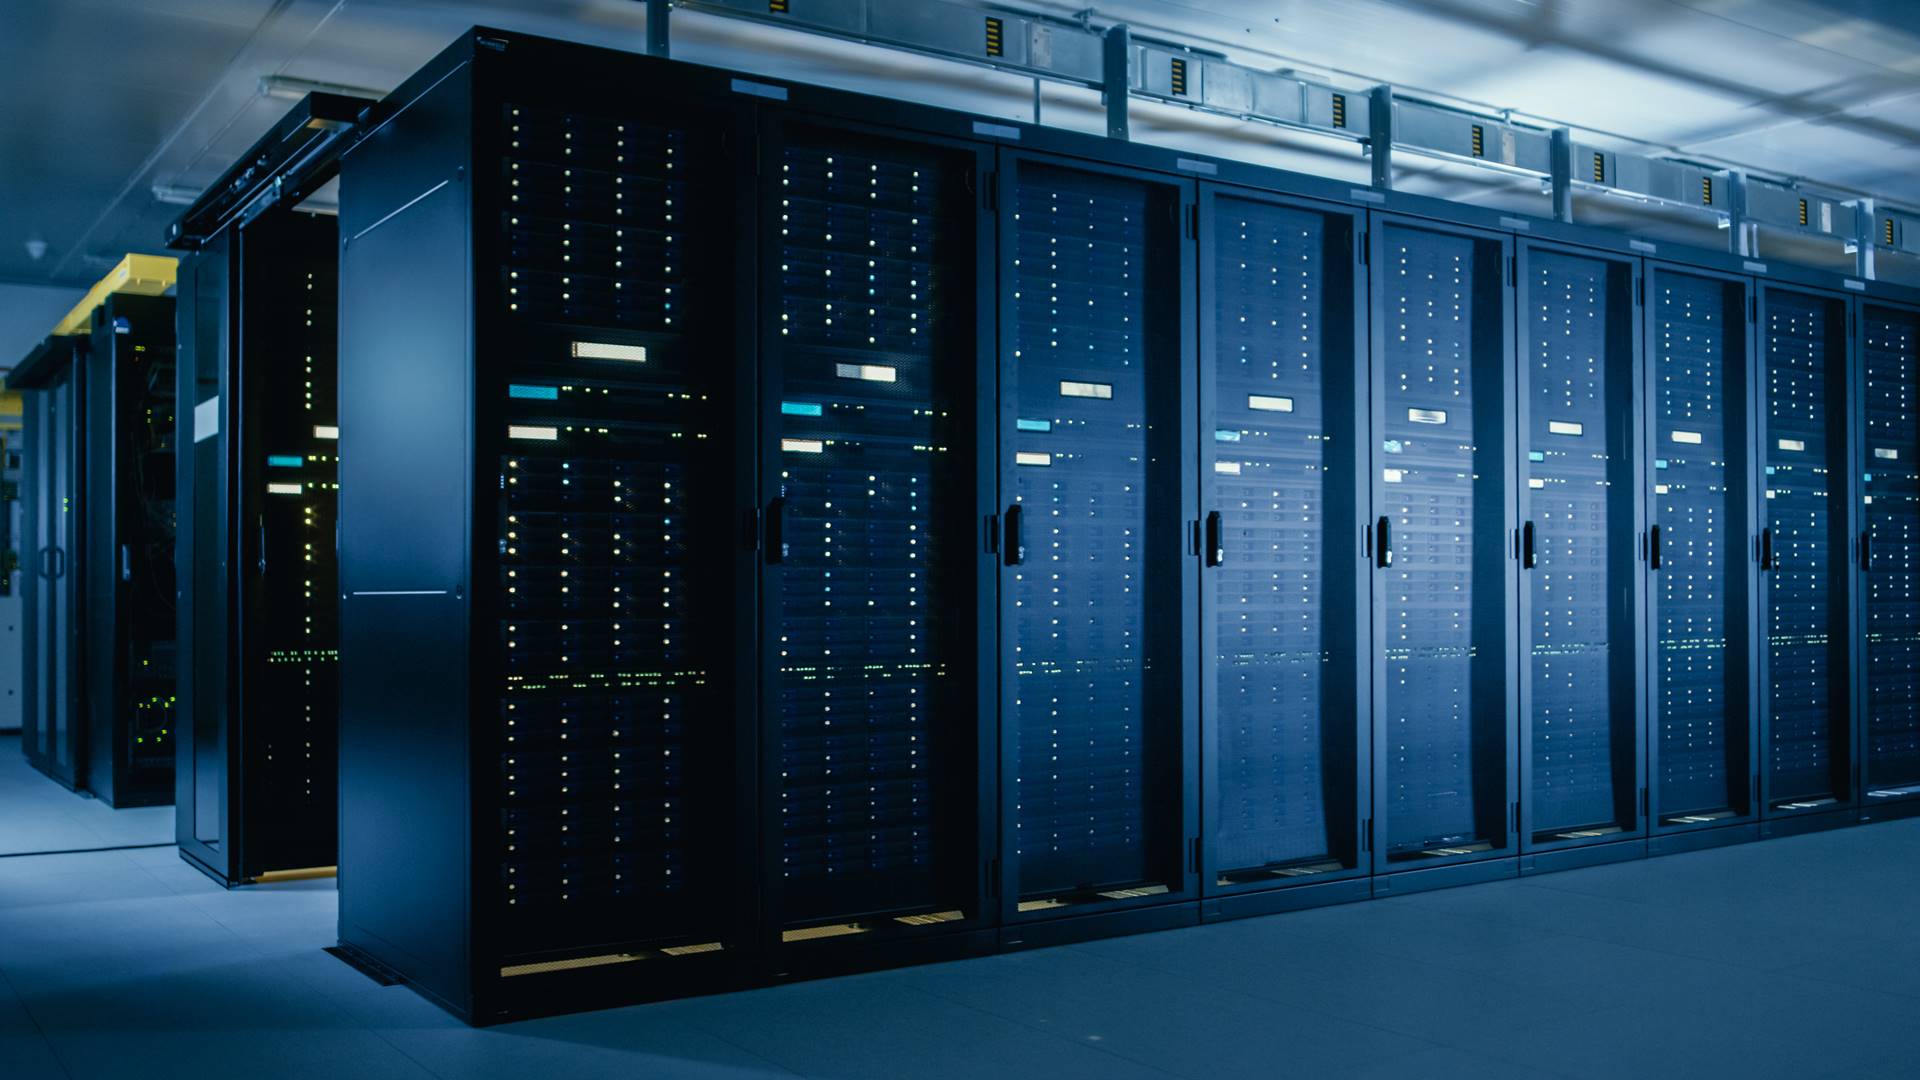 Shot of Data Center With Multiple Rows of Fully Operational Server Racks. Modern Telecommunications, Cloud Computing, Artificial Intelligence, Database, Super Computer Technology Concept.